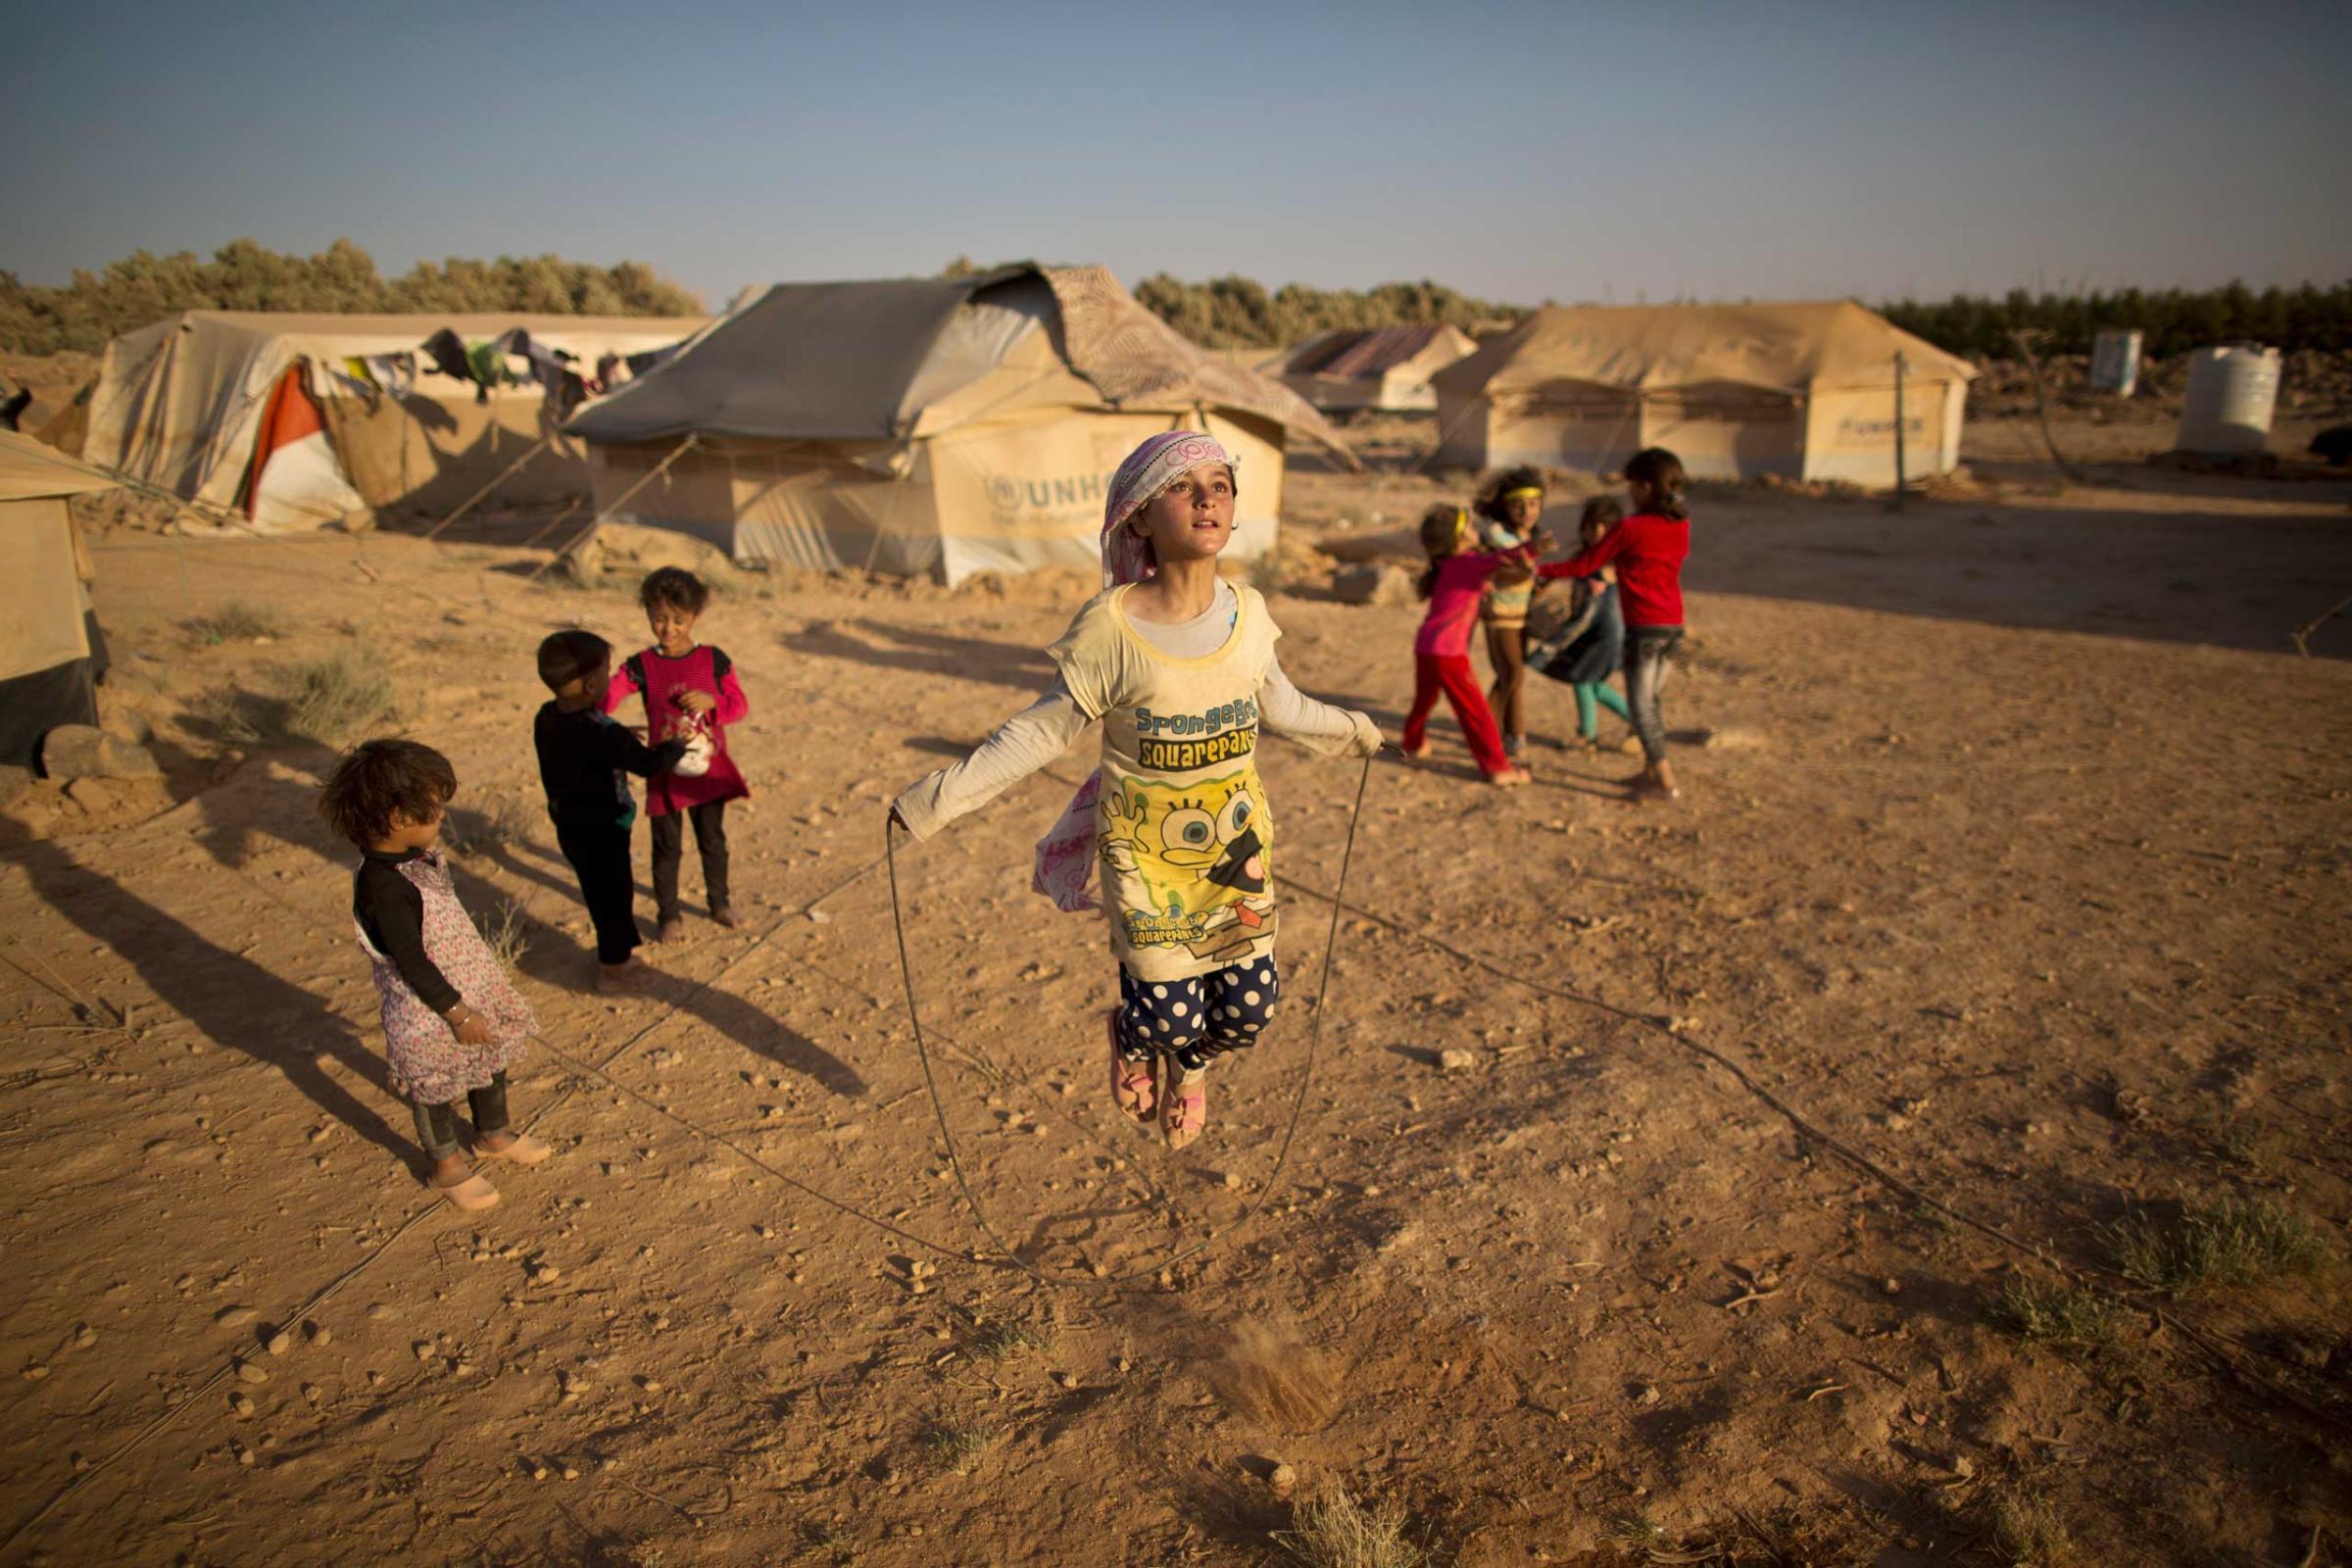 Syrian refugee girl, Zubaida Faisal, 10, skips a rope while she and other children play near their tents at an informal tented settlement near the Syrian border on the outskirts of Mafraq, Jordan. July 19, 2015